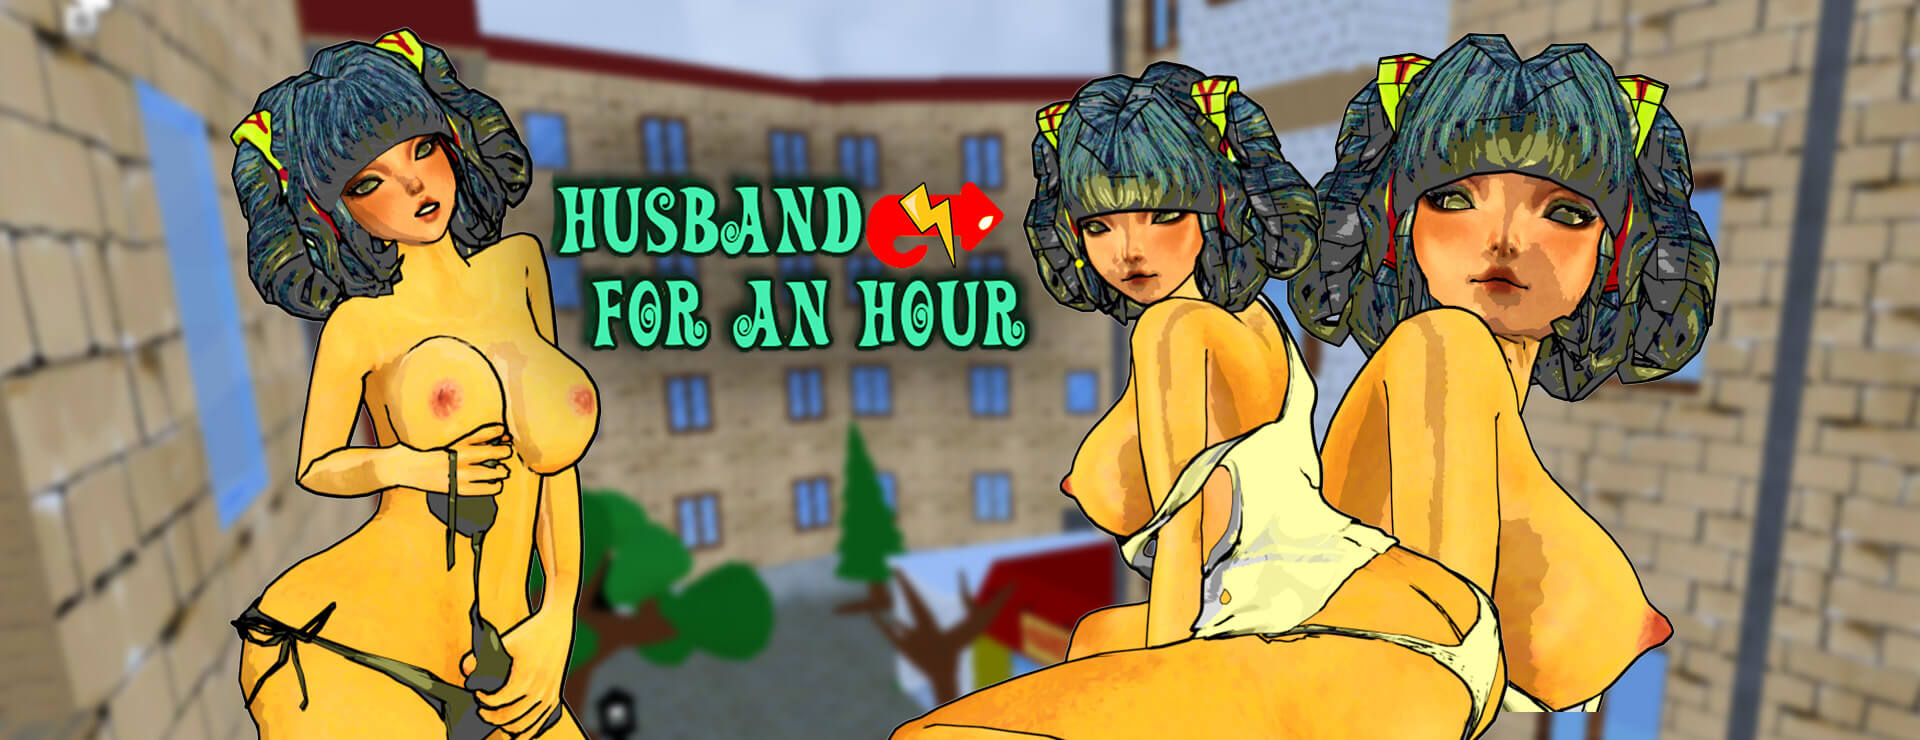 Husband for an Hour - Action Adventure Spiel